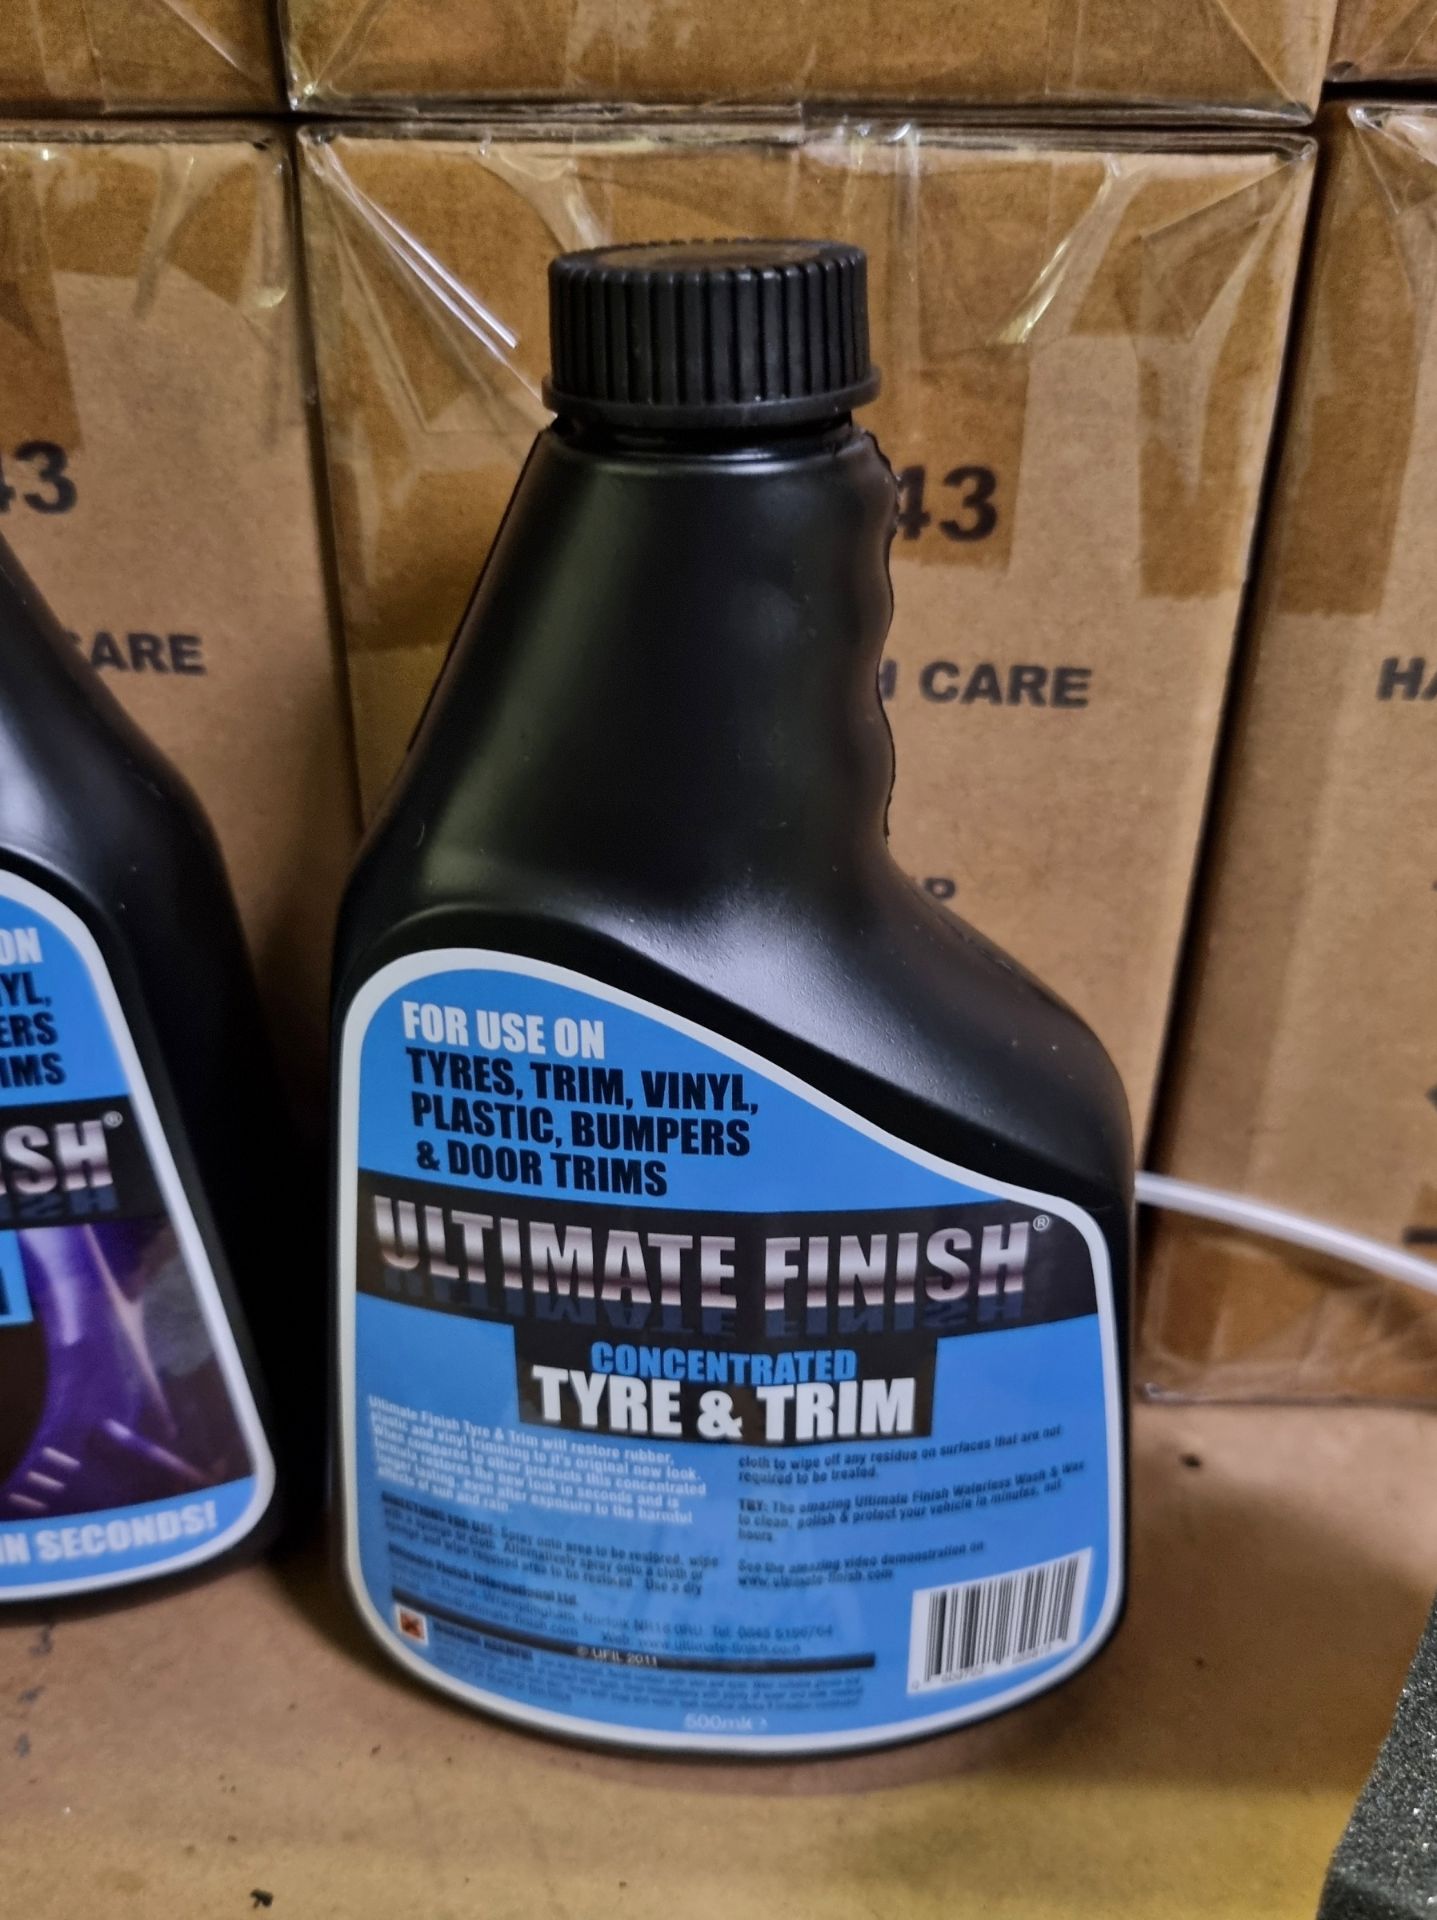 50x Ultimate Finish concentrate tyre & trim - double packs - 2x 500ml spray bottles & 2x applicators - Image 4 of 4